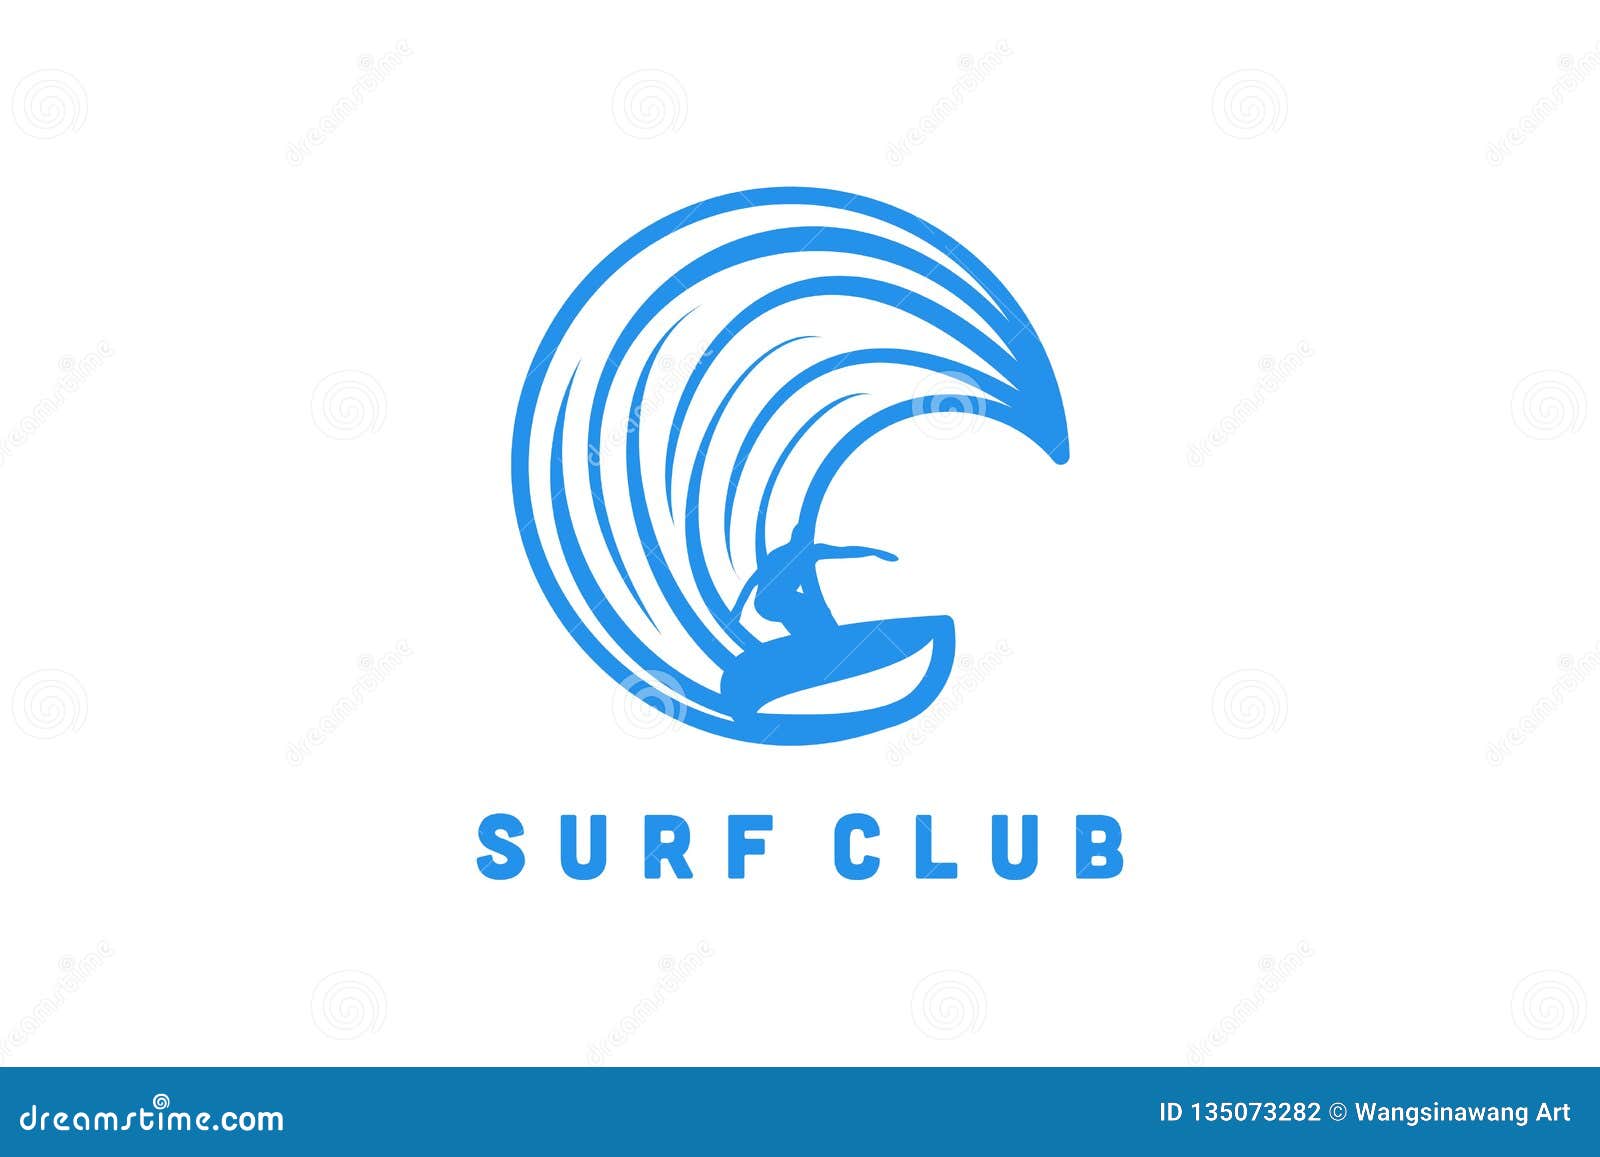 Surf Player, Man and Wave Logo Designs Inspiration Isolated on White ...